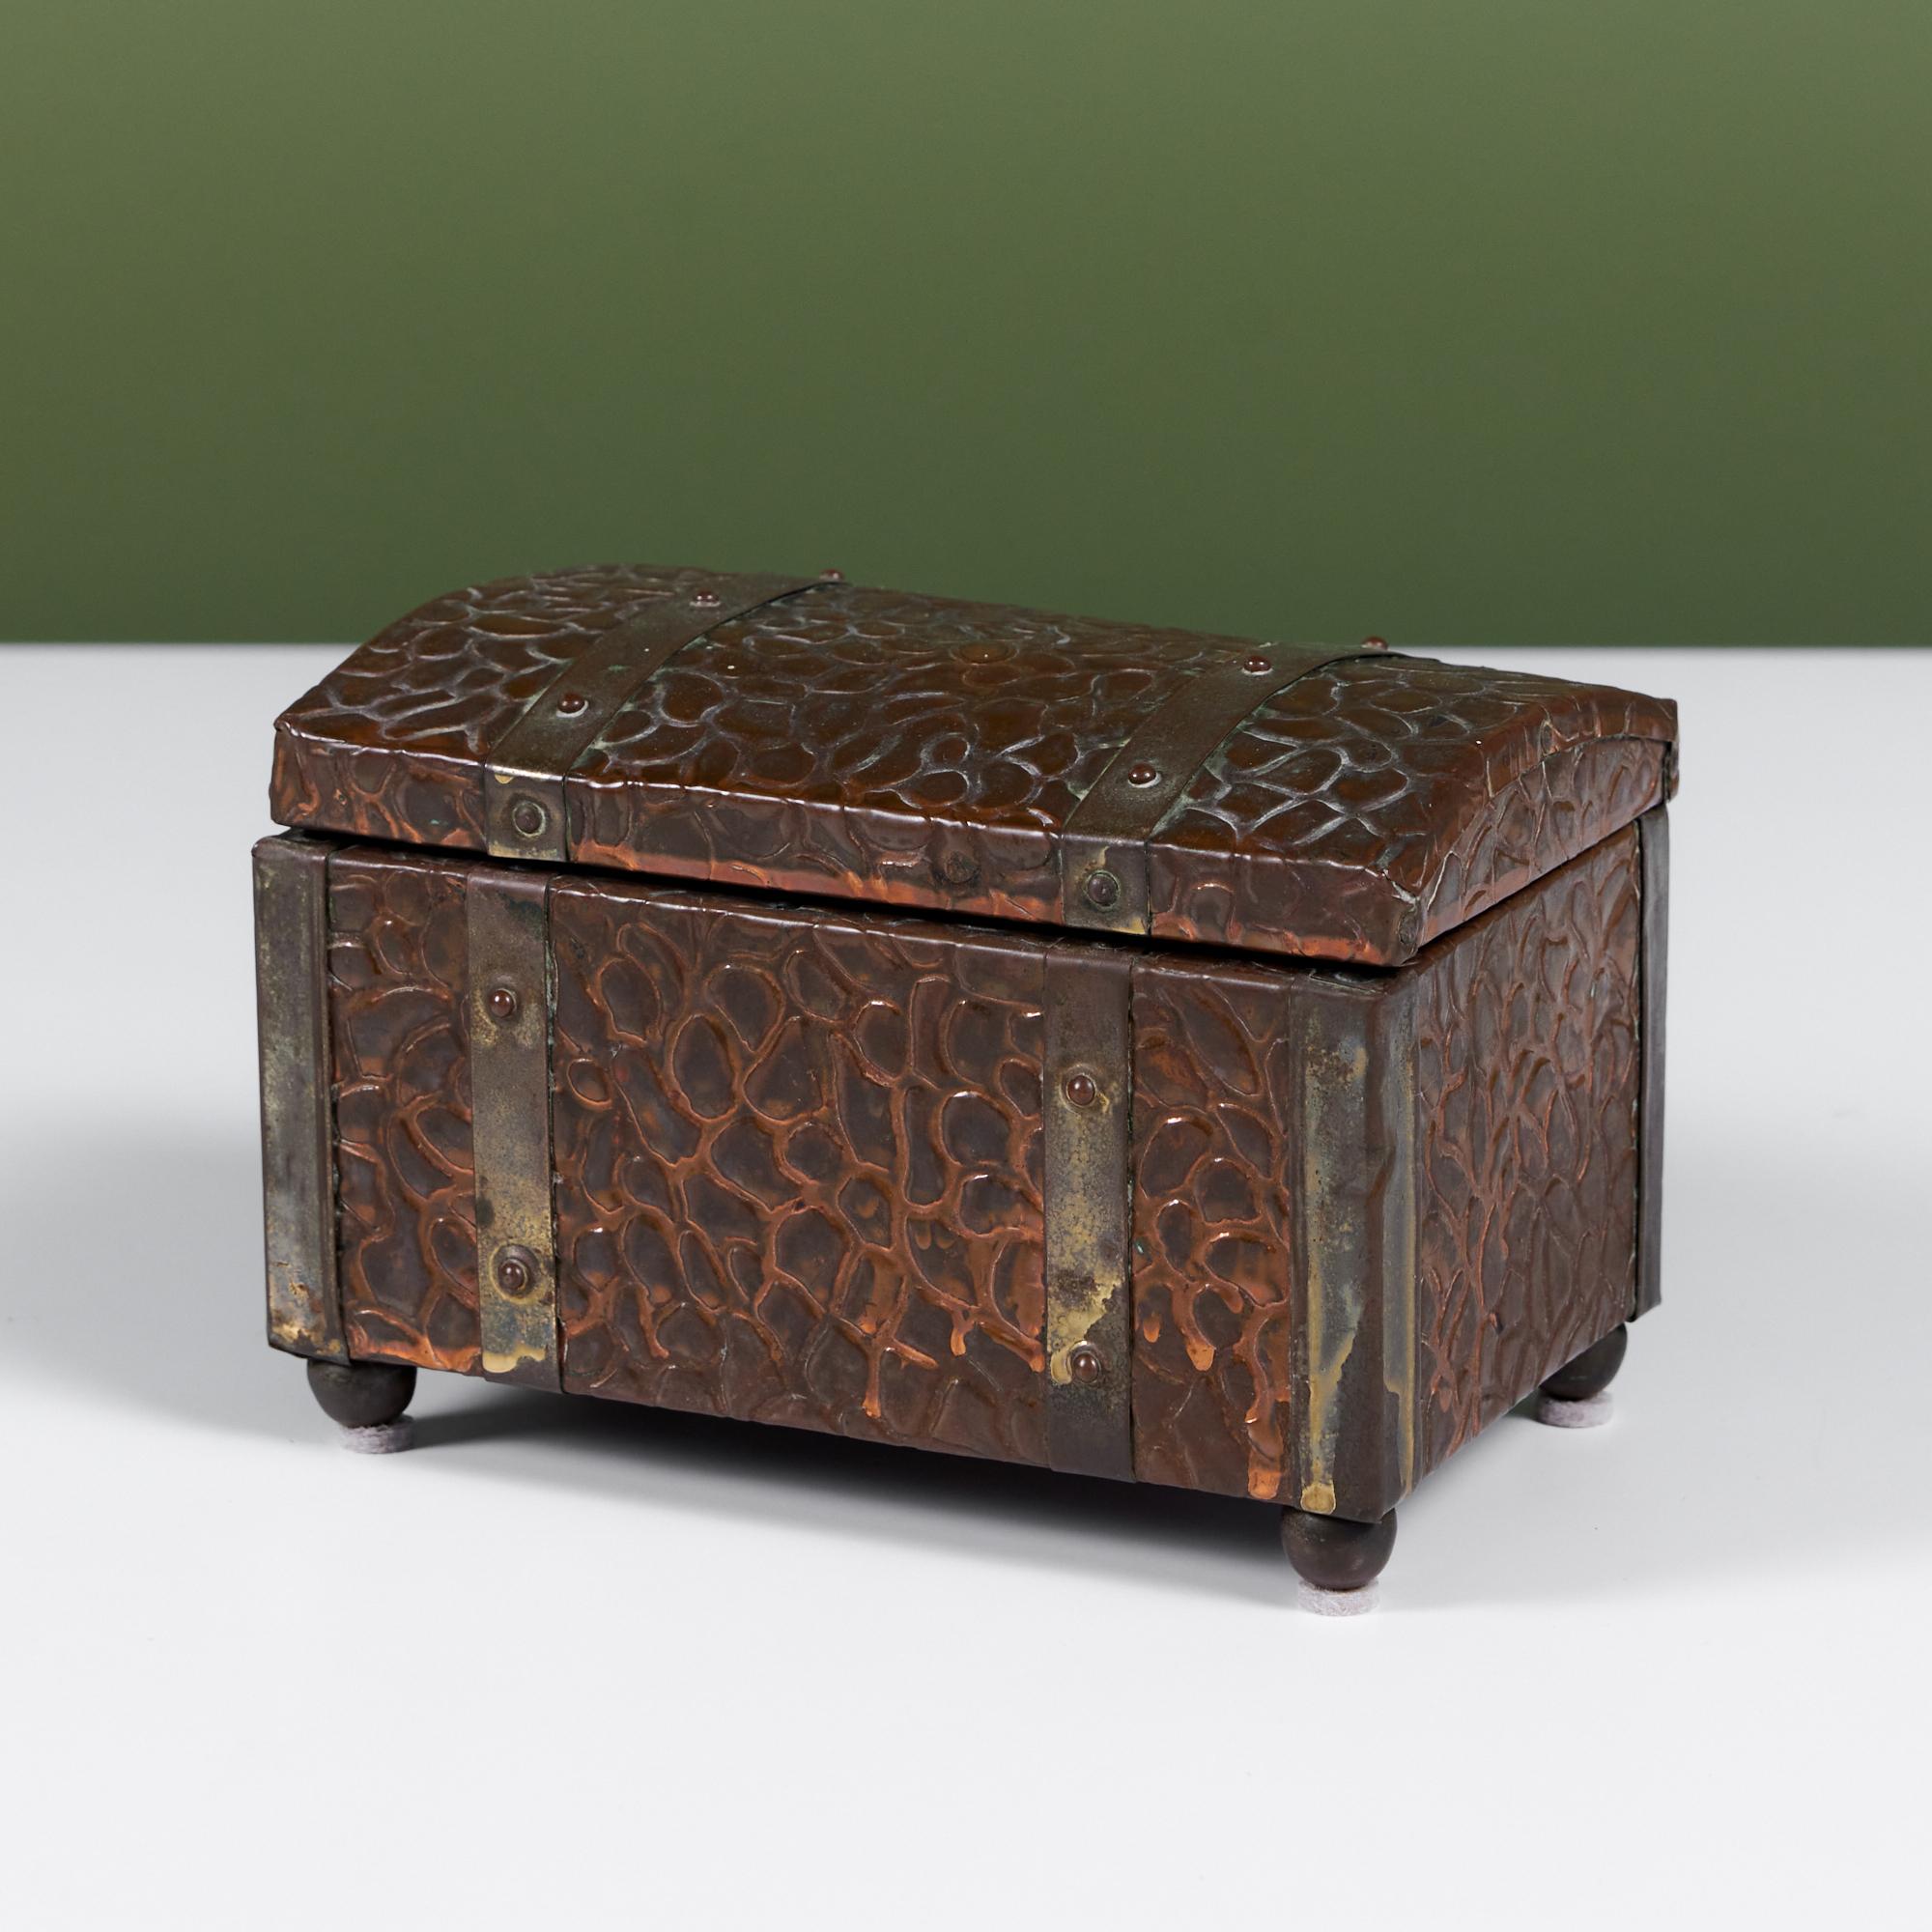 Textured copper box with brass detailing. The exterior of the box features pebbled like texture, perfectly patinated with brass hinges, ball feet and detailing. The hinged box is perfect as catchall for small treasures.

Dimensions
6